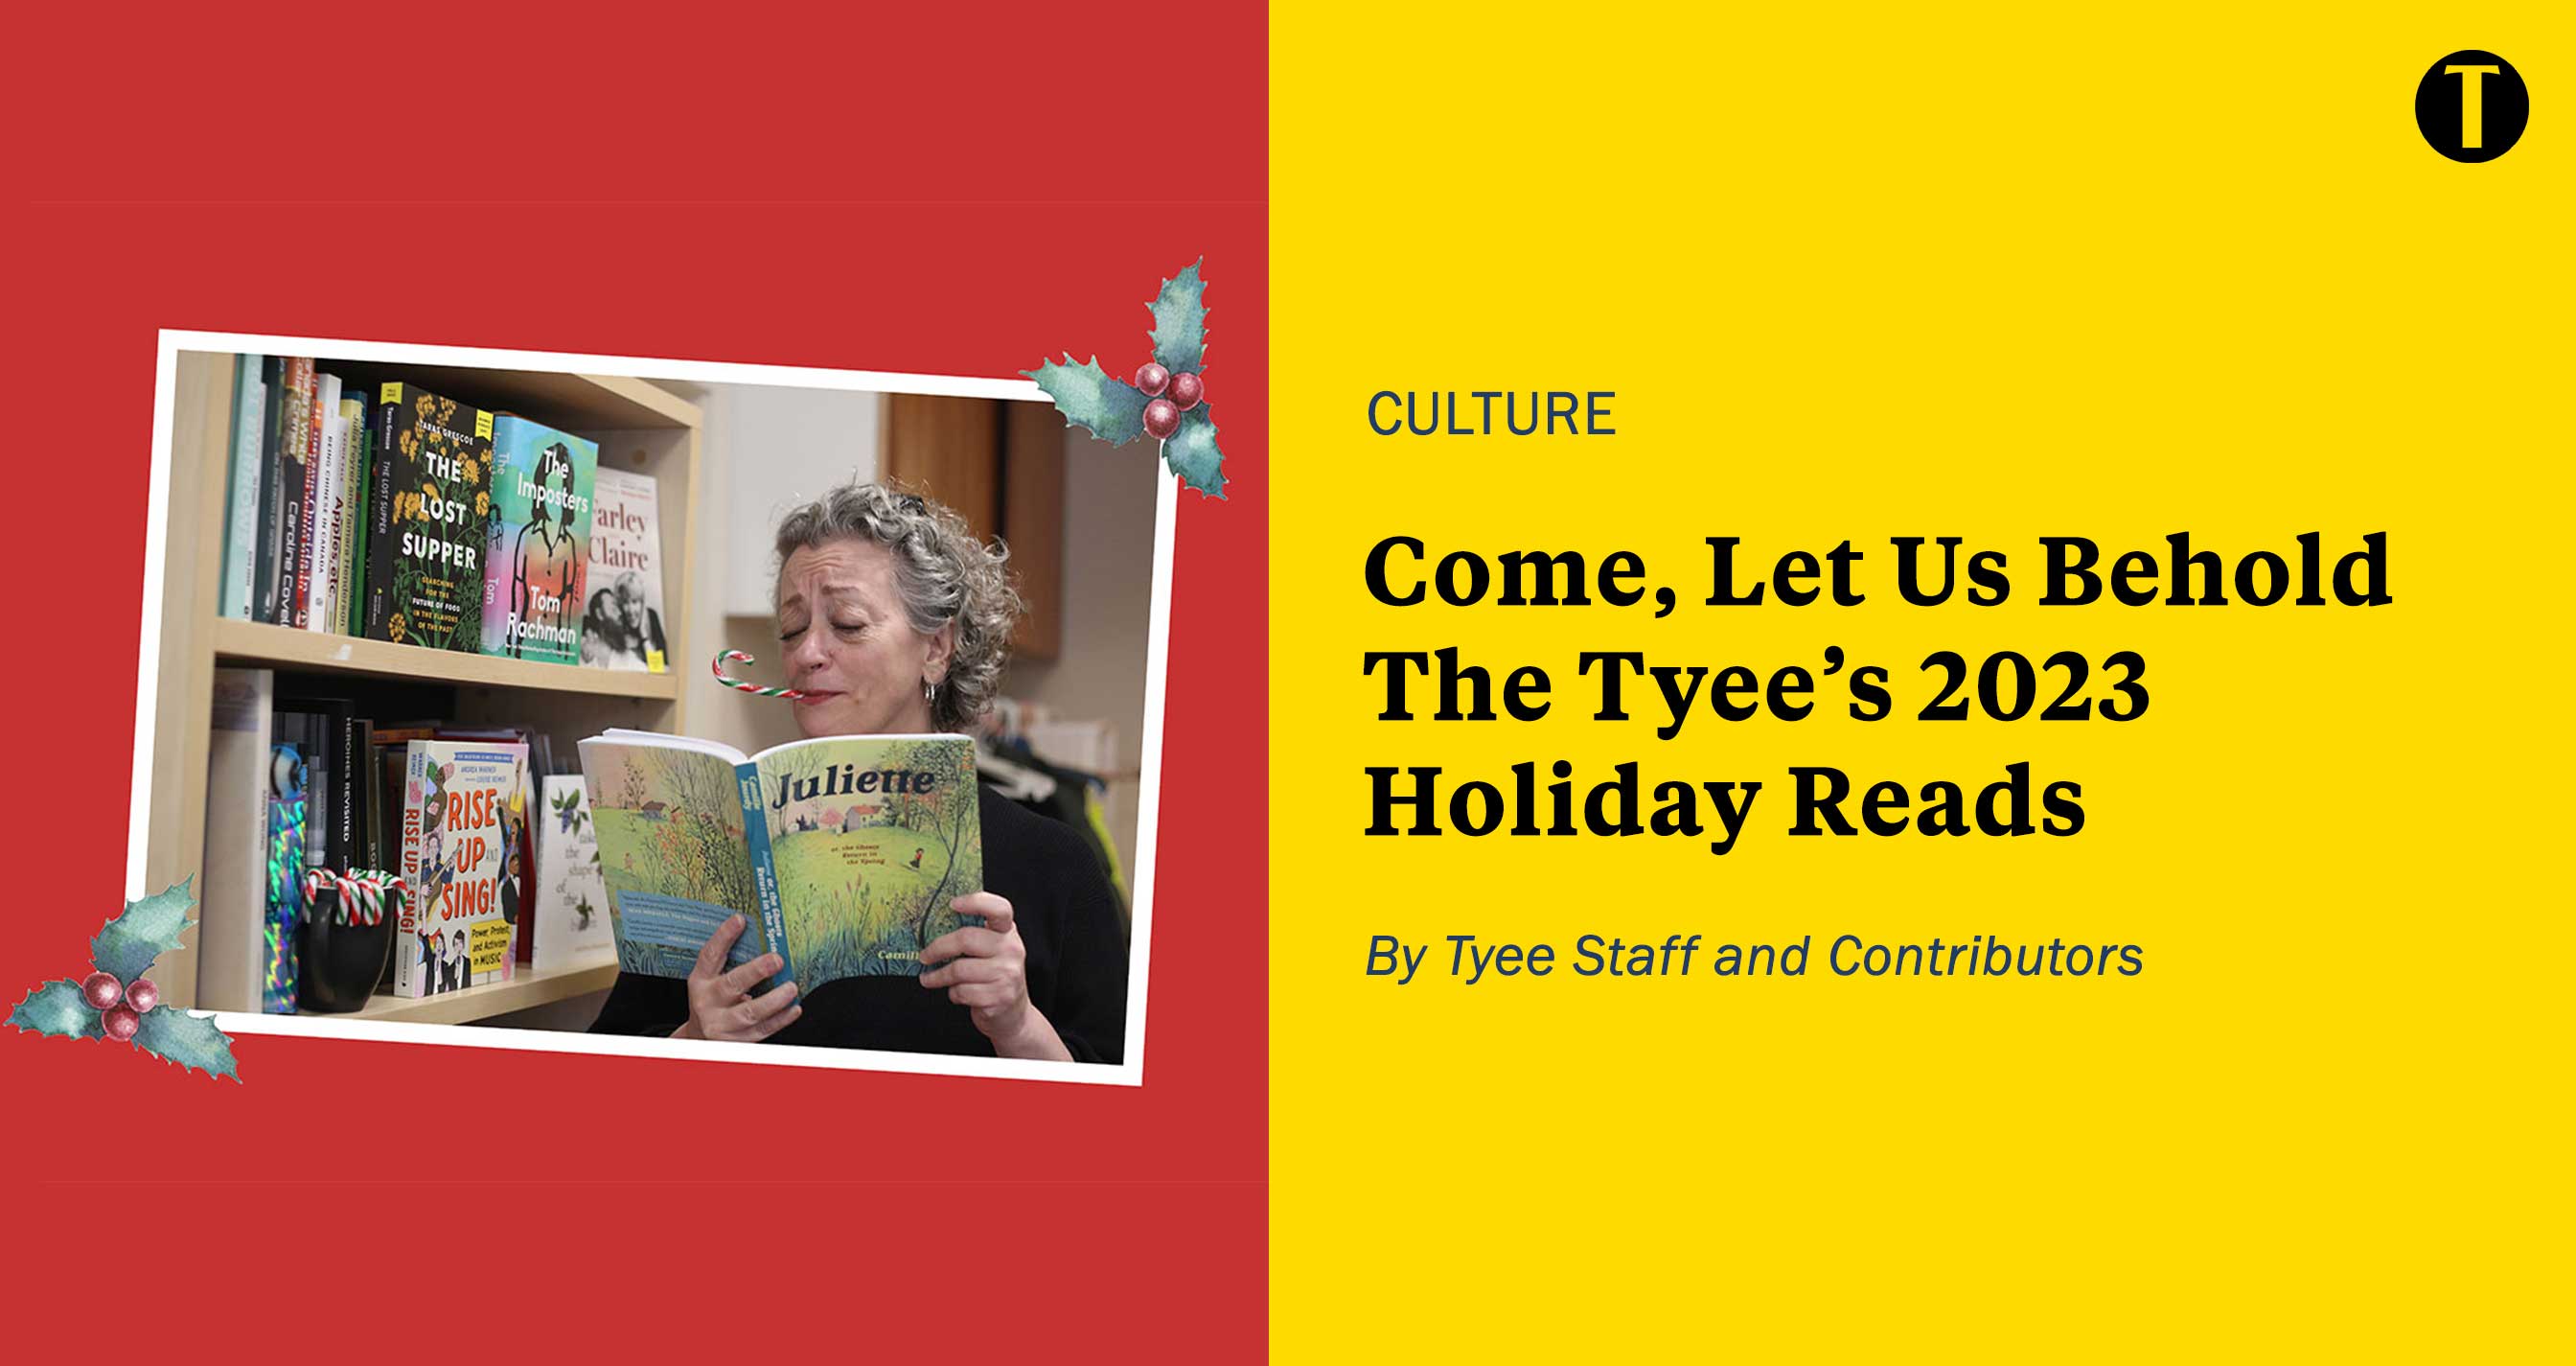 Come, Let Us Behold The Tyee's 2023 Holiday Reads